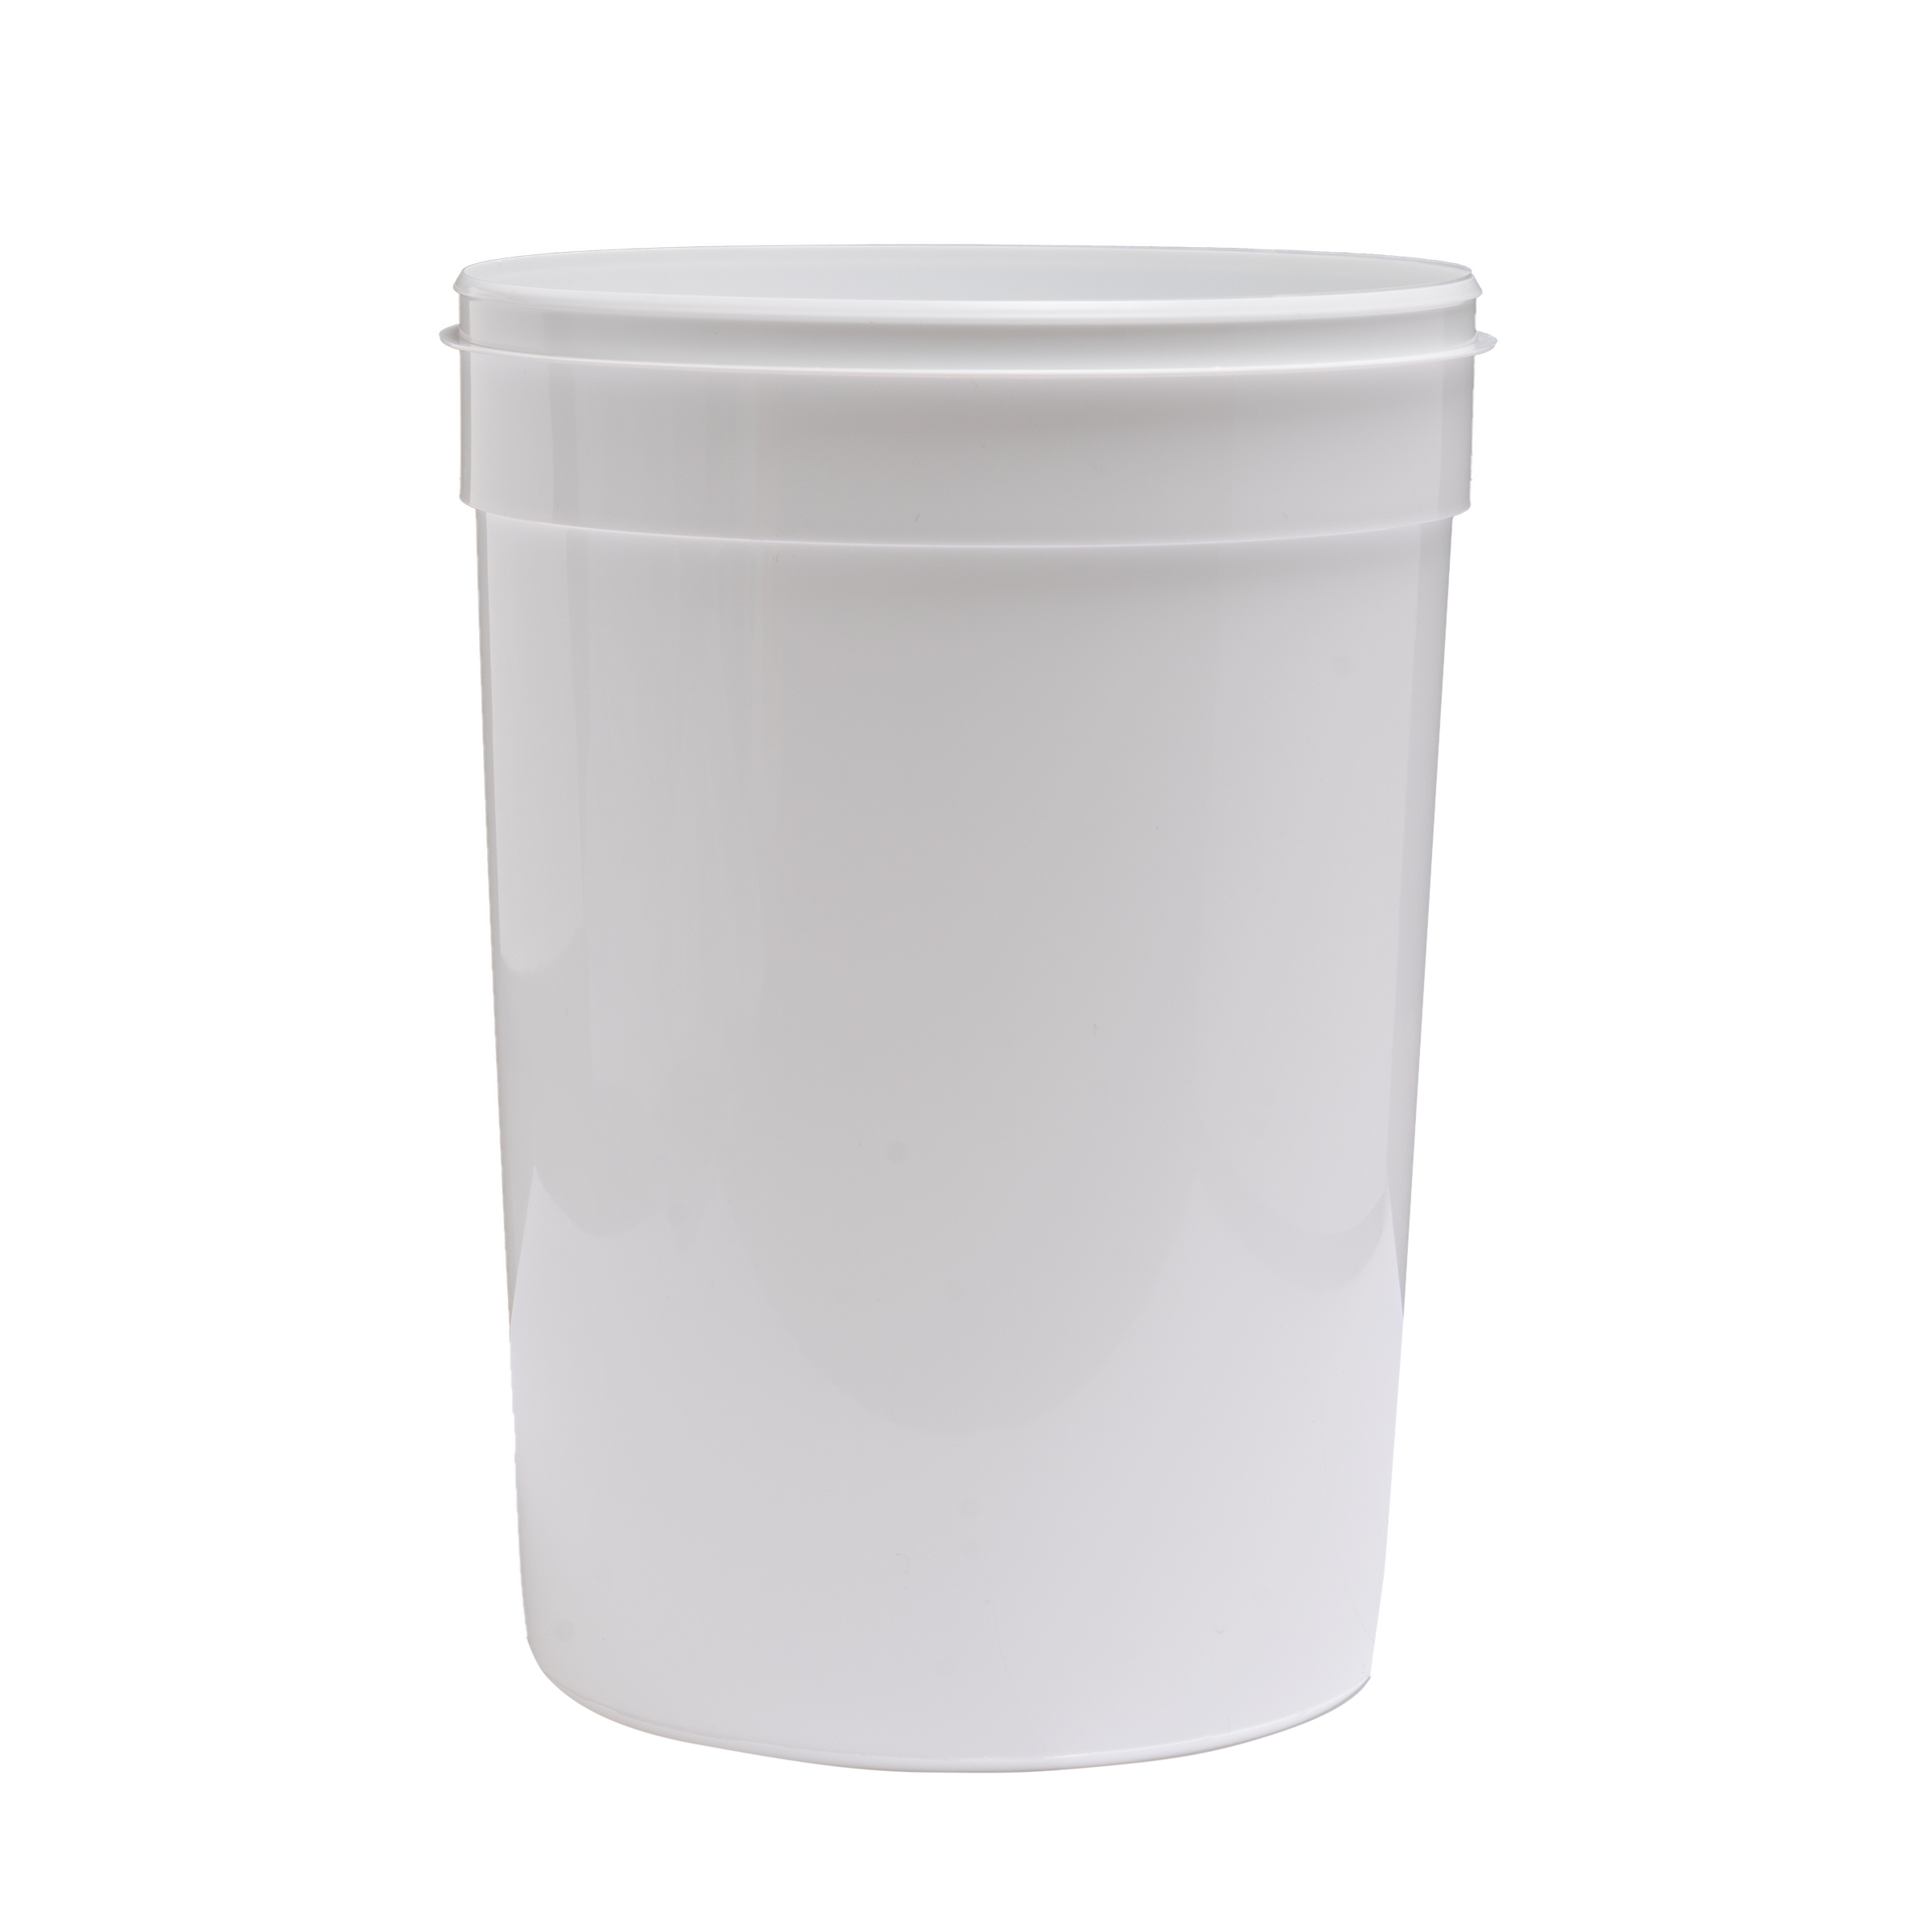 https://www.containersupplycompany.com/wp-content/uploads/2020/03/6-1_2-tub.png